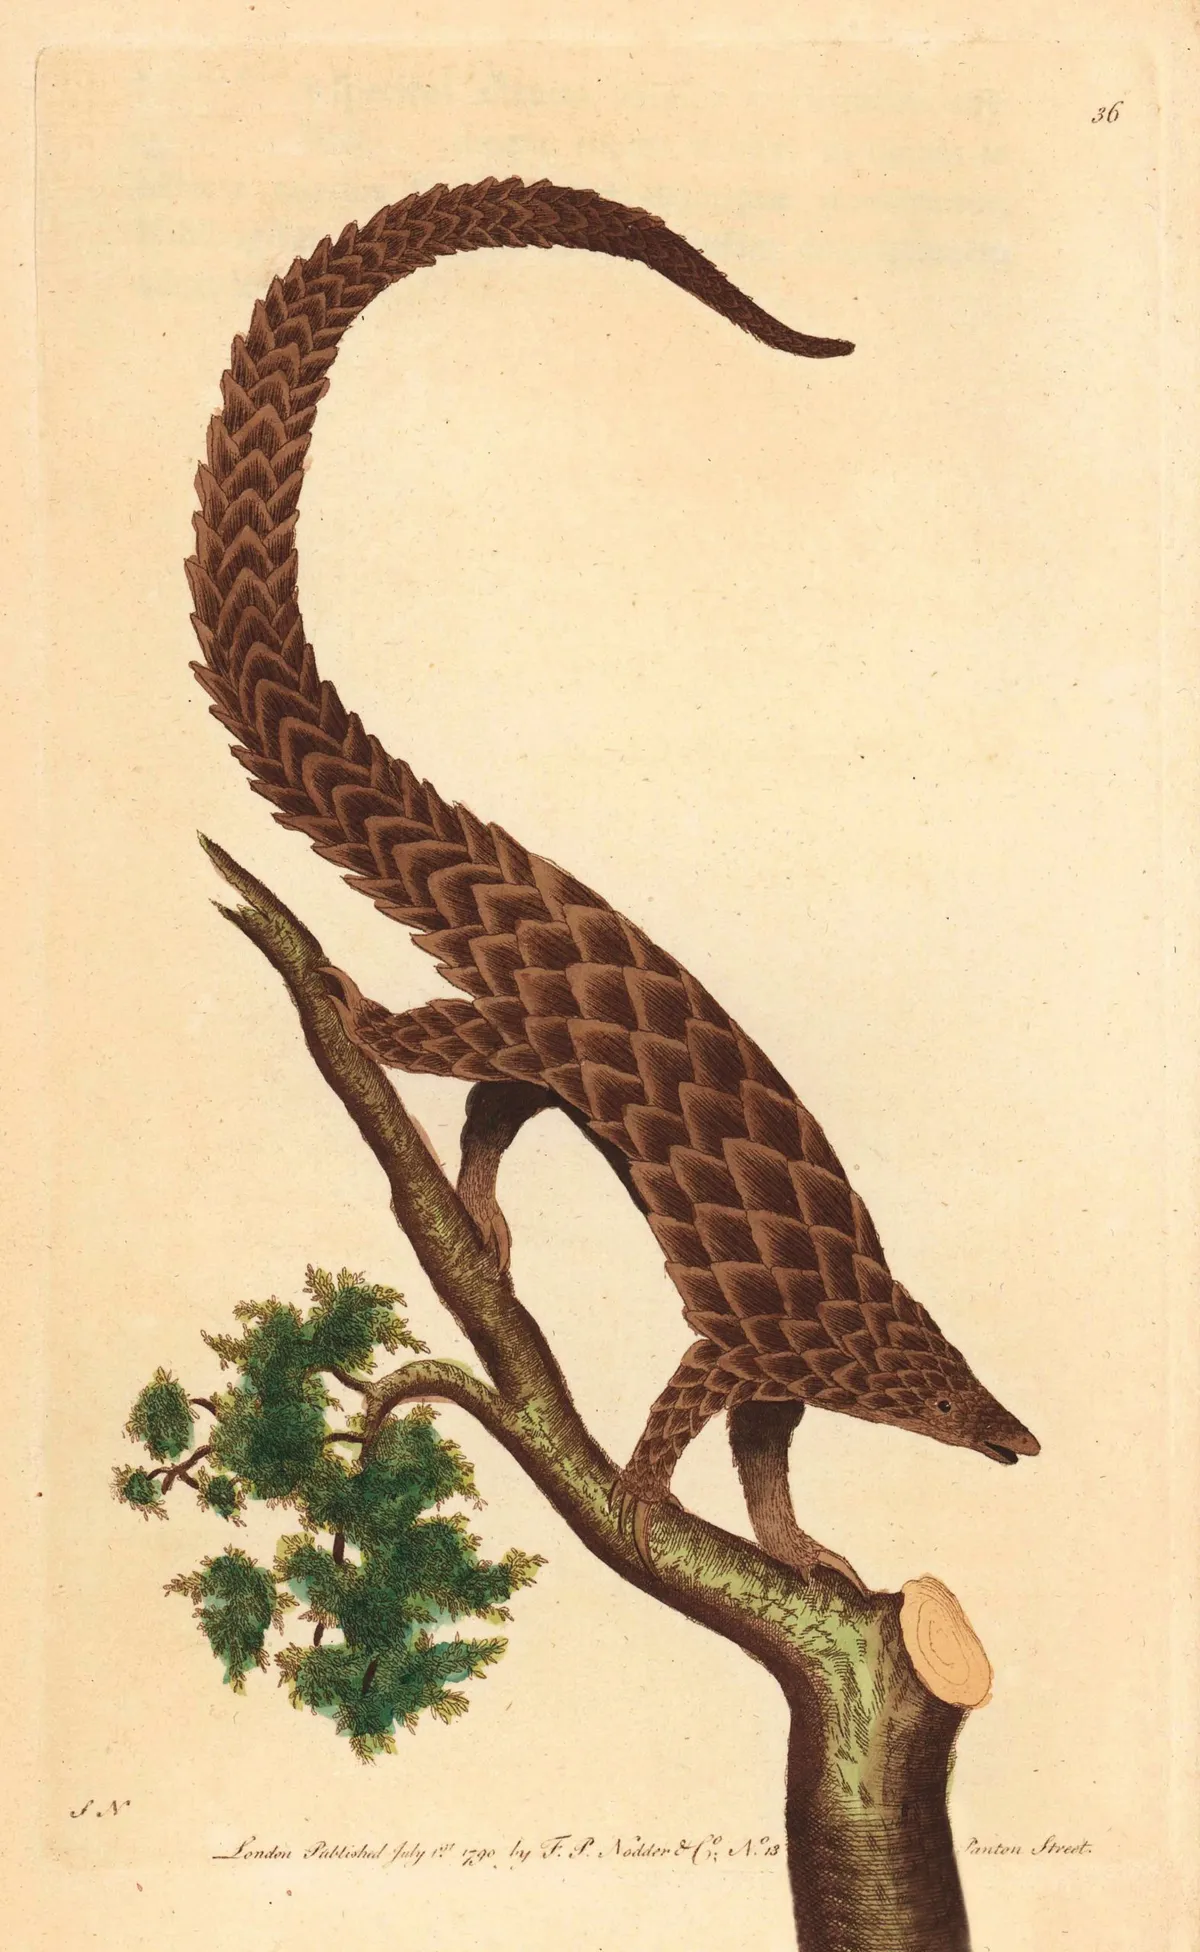 A long-tailed pangolin engraving from George Shaw and Frederick Nodder’s The Naturalist’s Miscellany (1790).